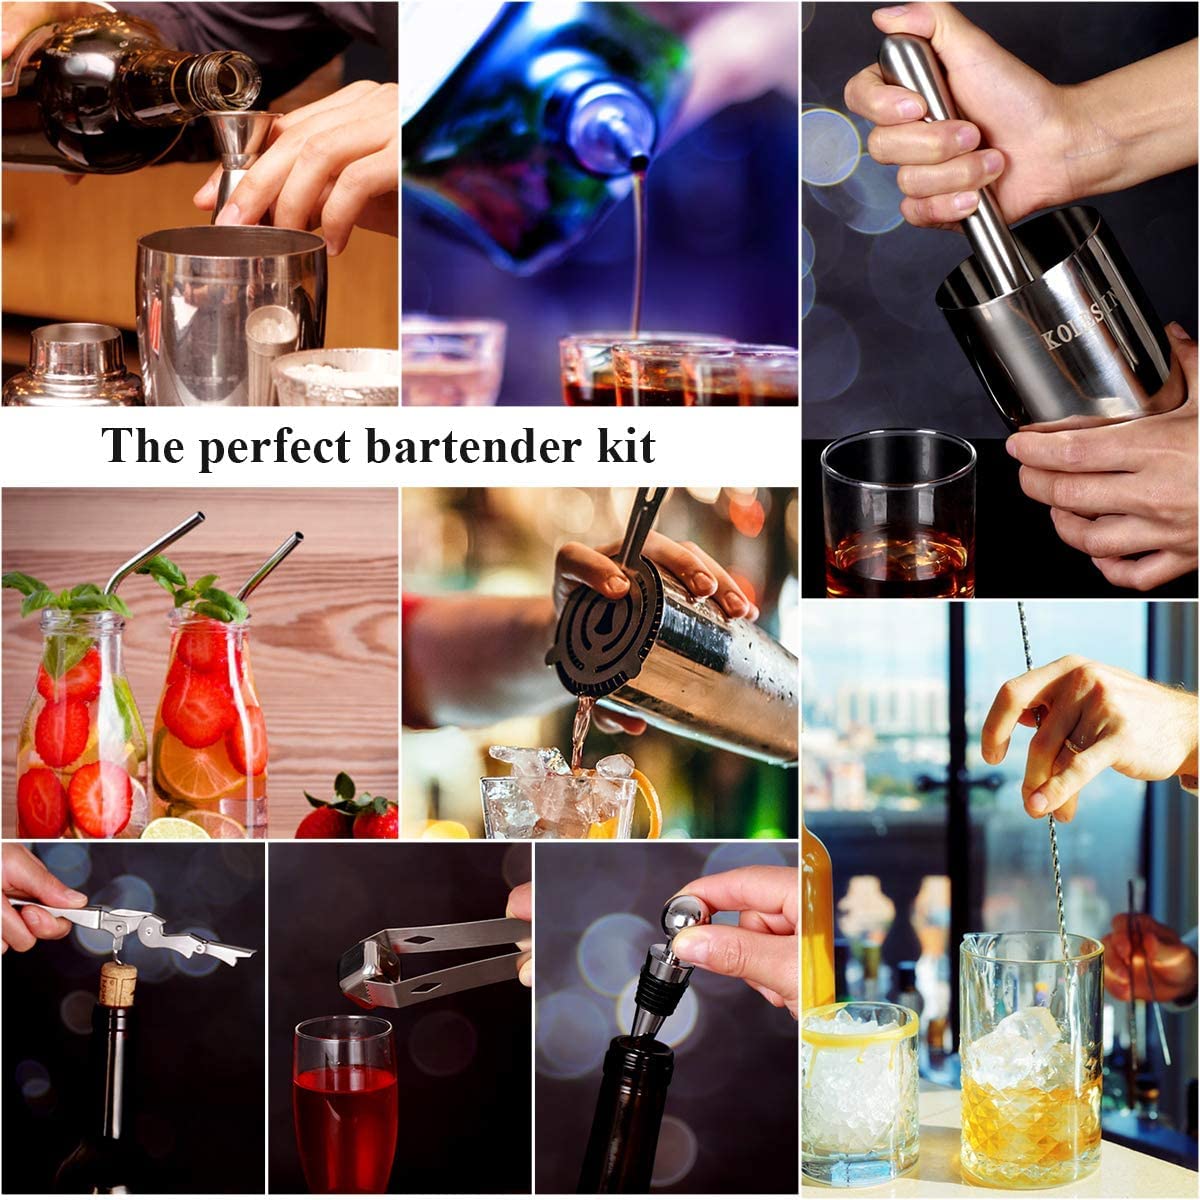 Bartender Kit, 26-Piece Stainless Steel Bartender Kit with Stylish Bamboo Stand Home Cocktail Shaker Set Bar Set with Bar Mixer Best Bar Kit for Beginners